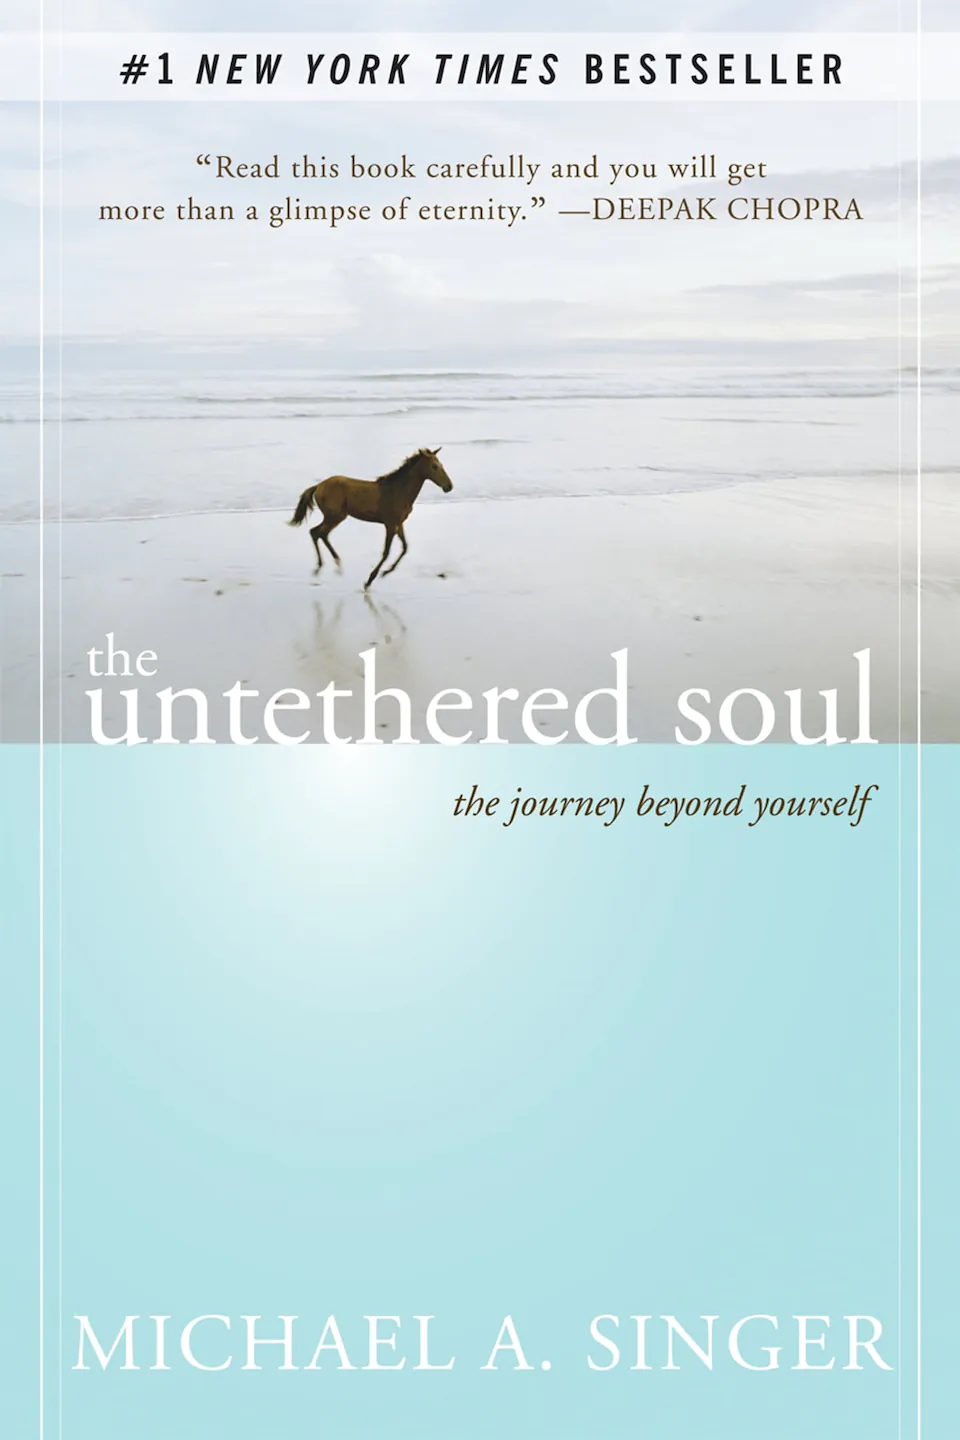 The Untethered Soul: The Journey Beyond Yourself by Michael A. Singer finished on 2023 Apr 06